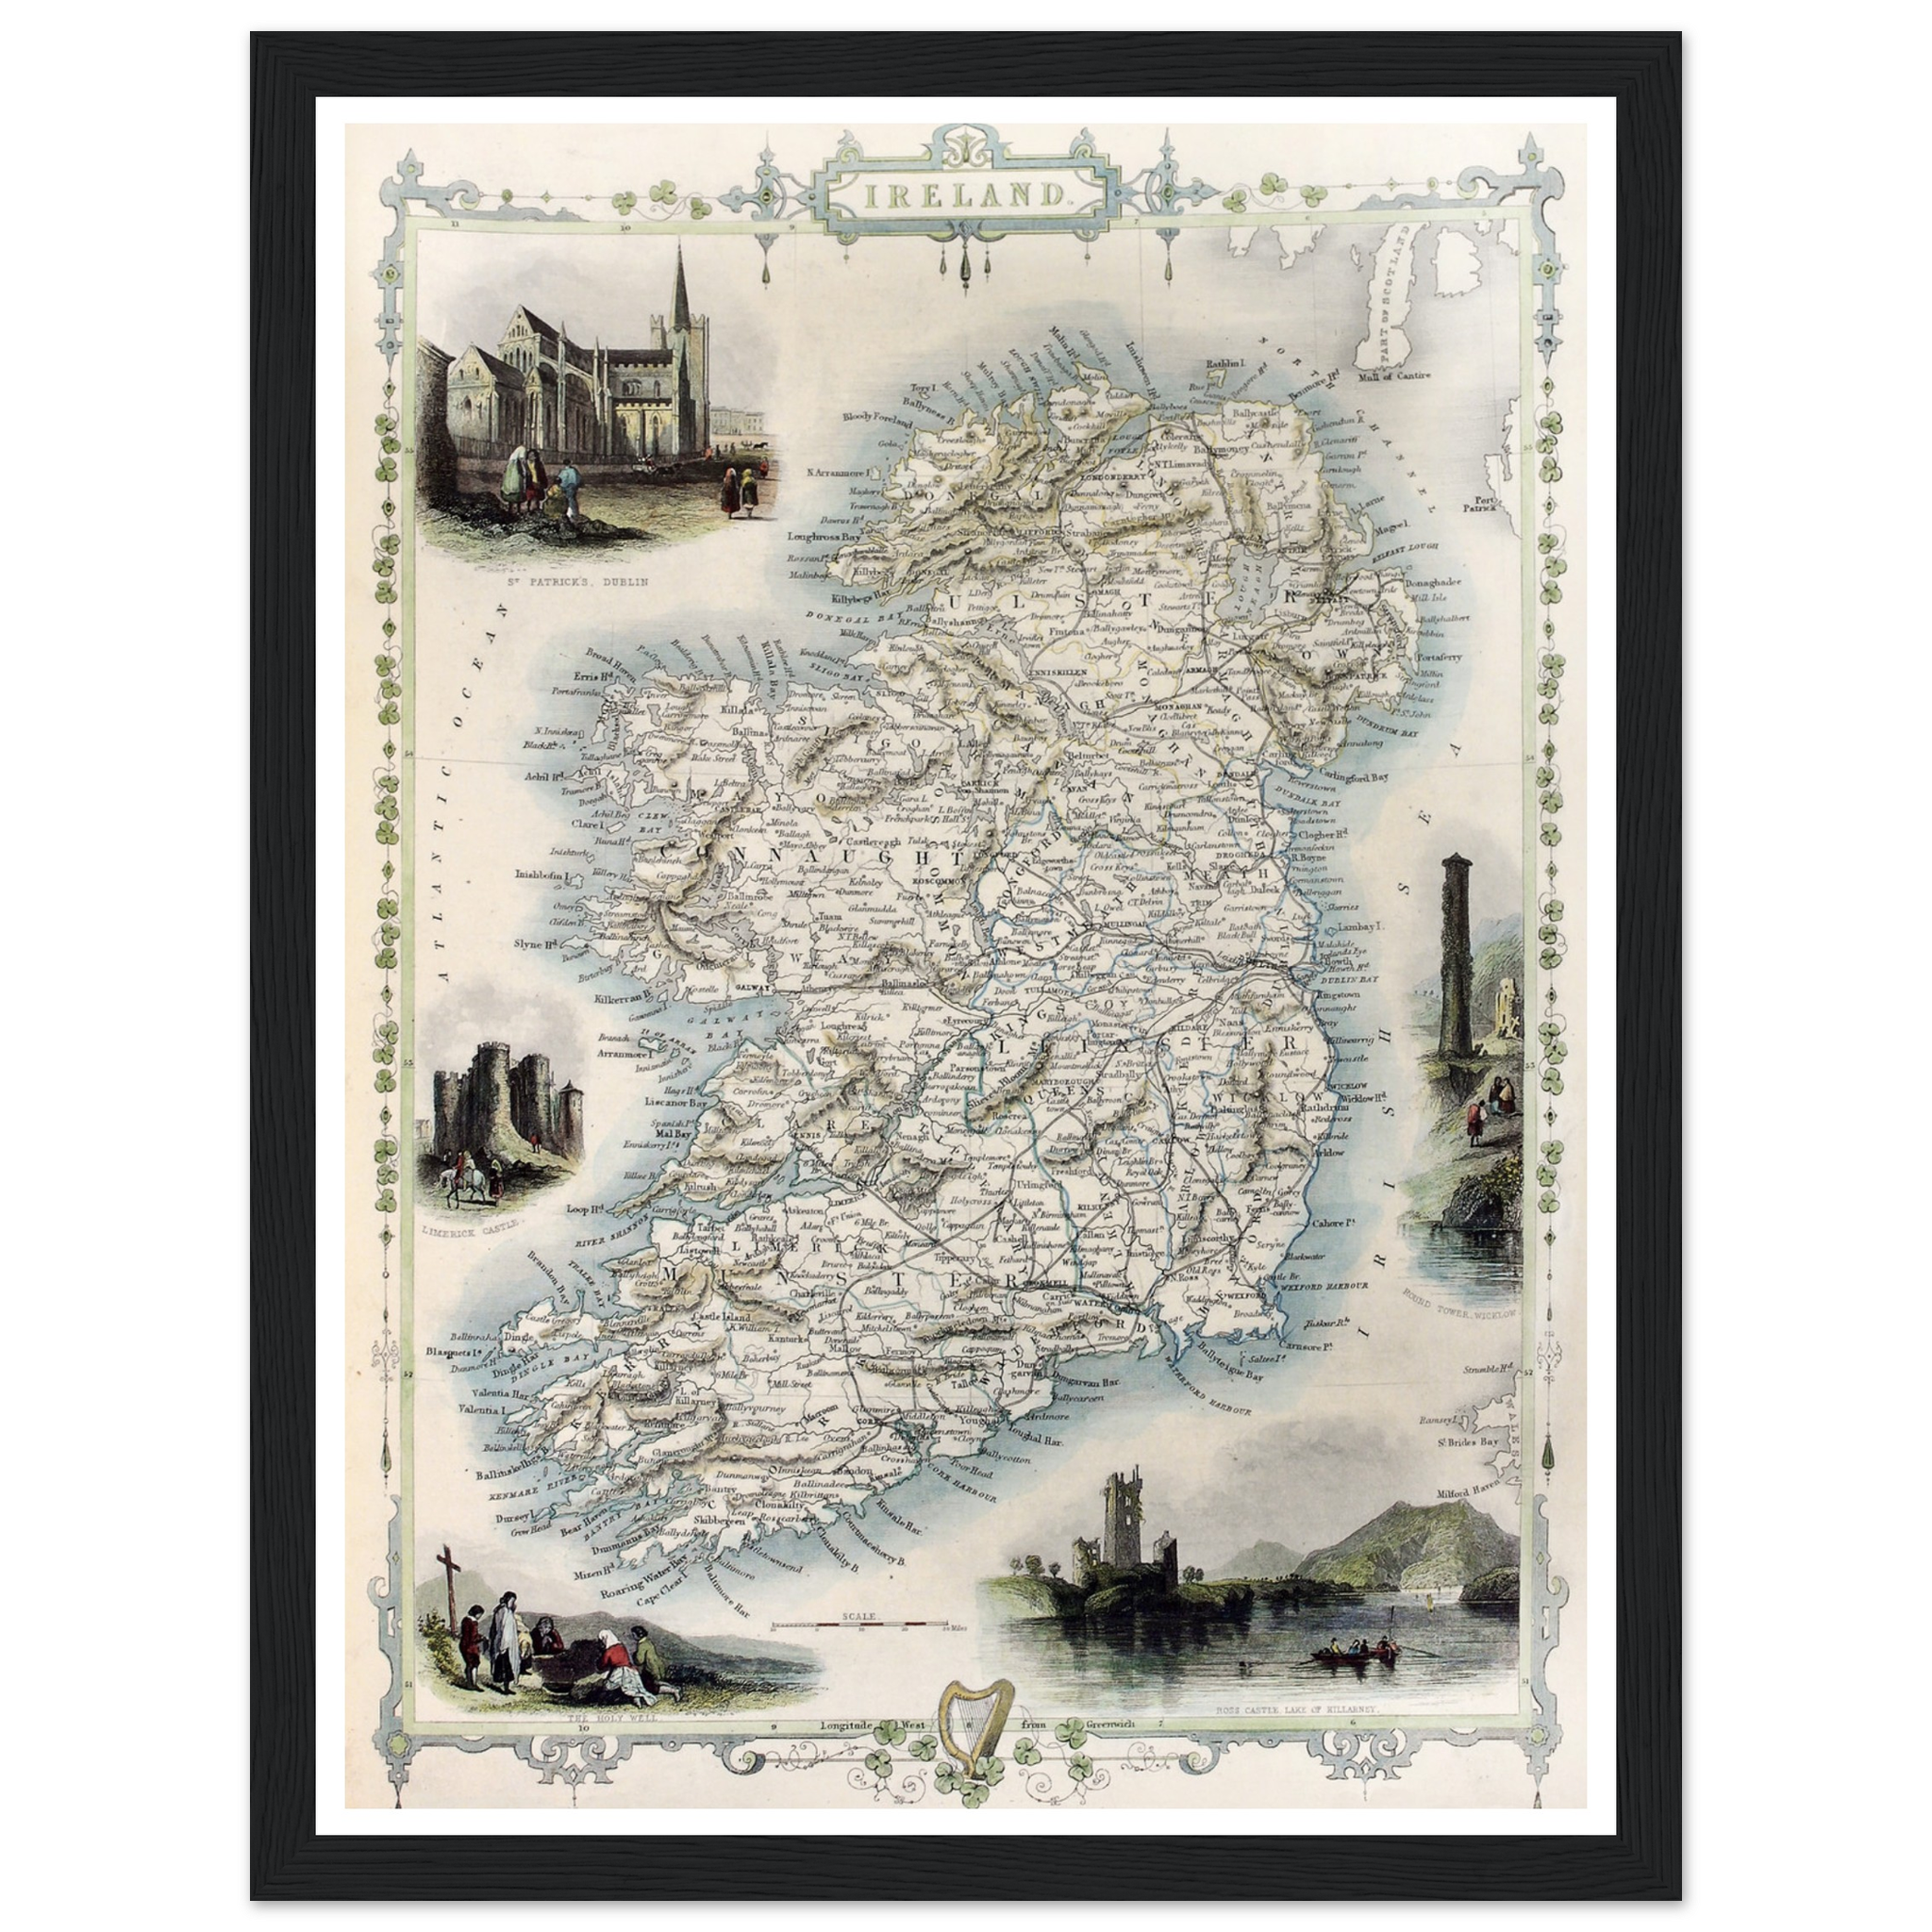 Old Map of Ireland, Vintage Antique Reproduction Framed Print